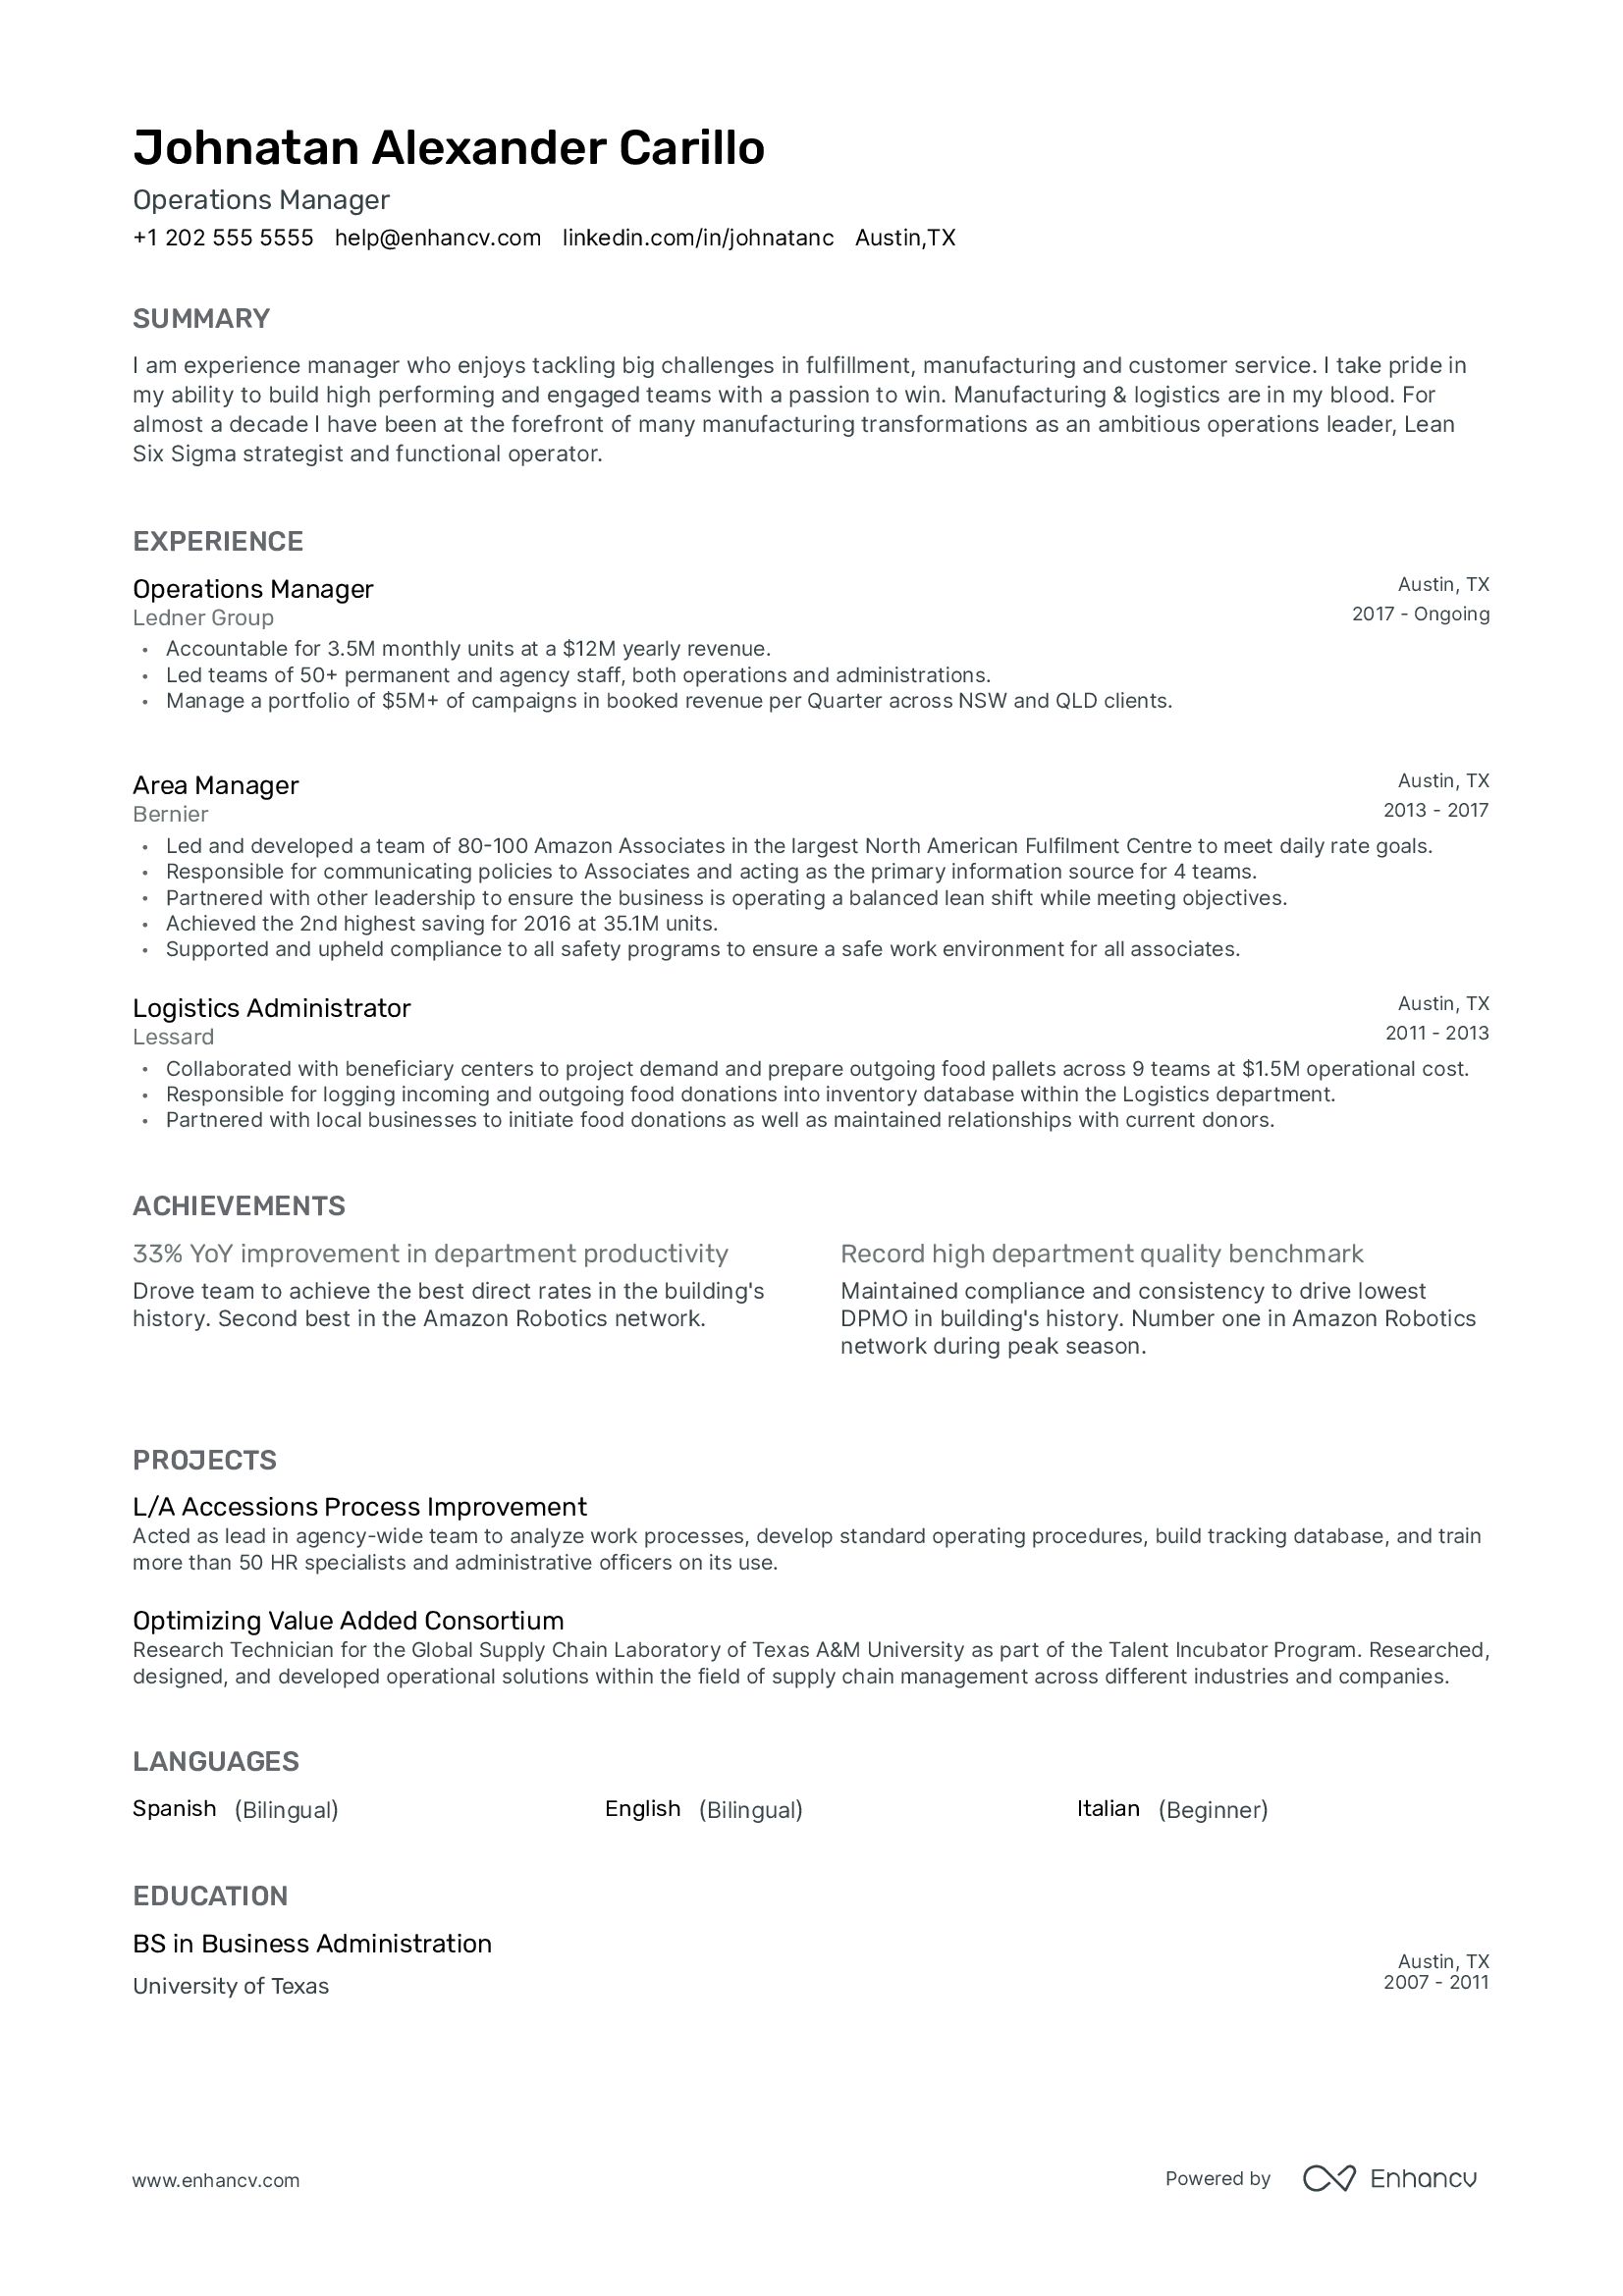 Grey single column classic resume template with a focus on experience and side projects.